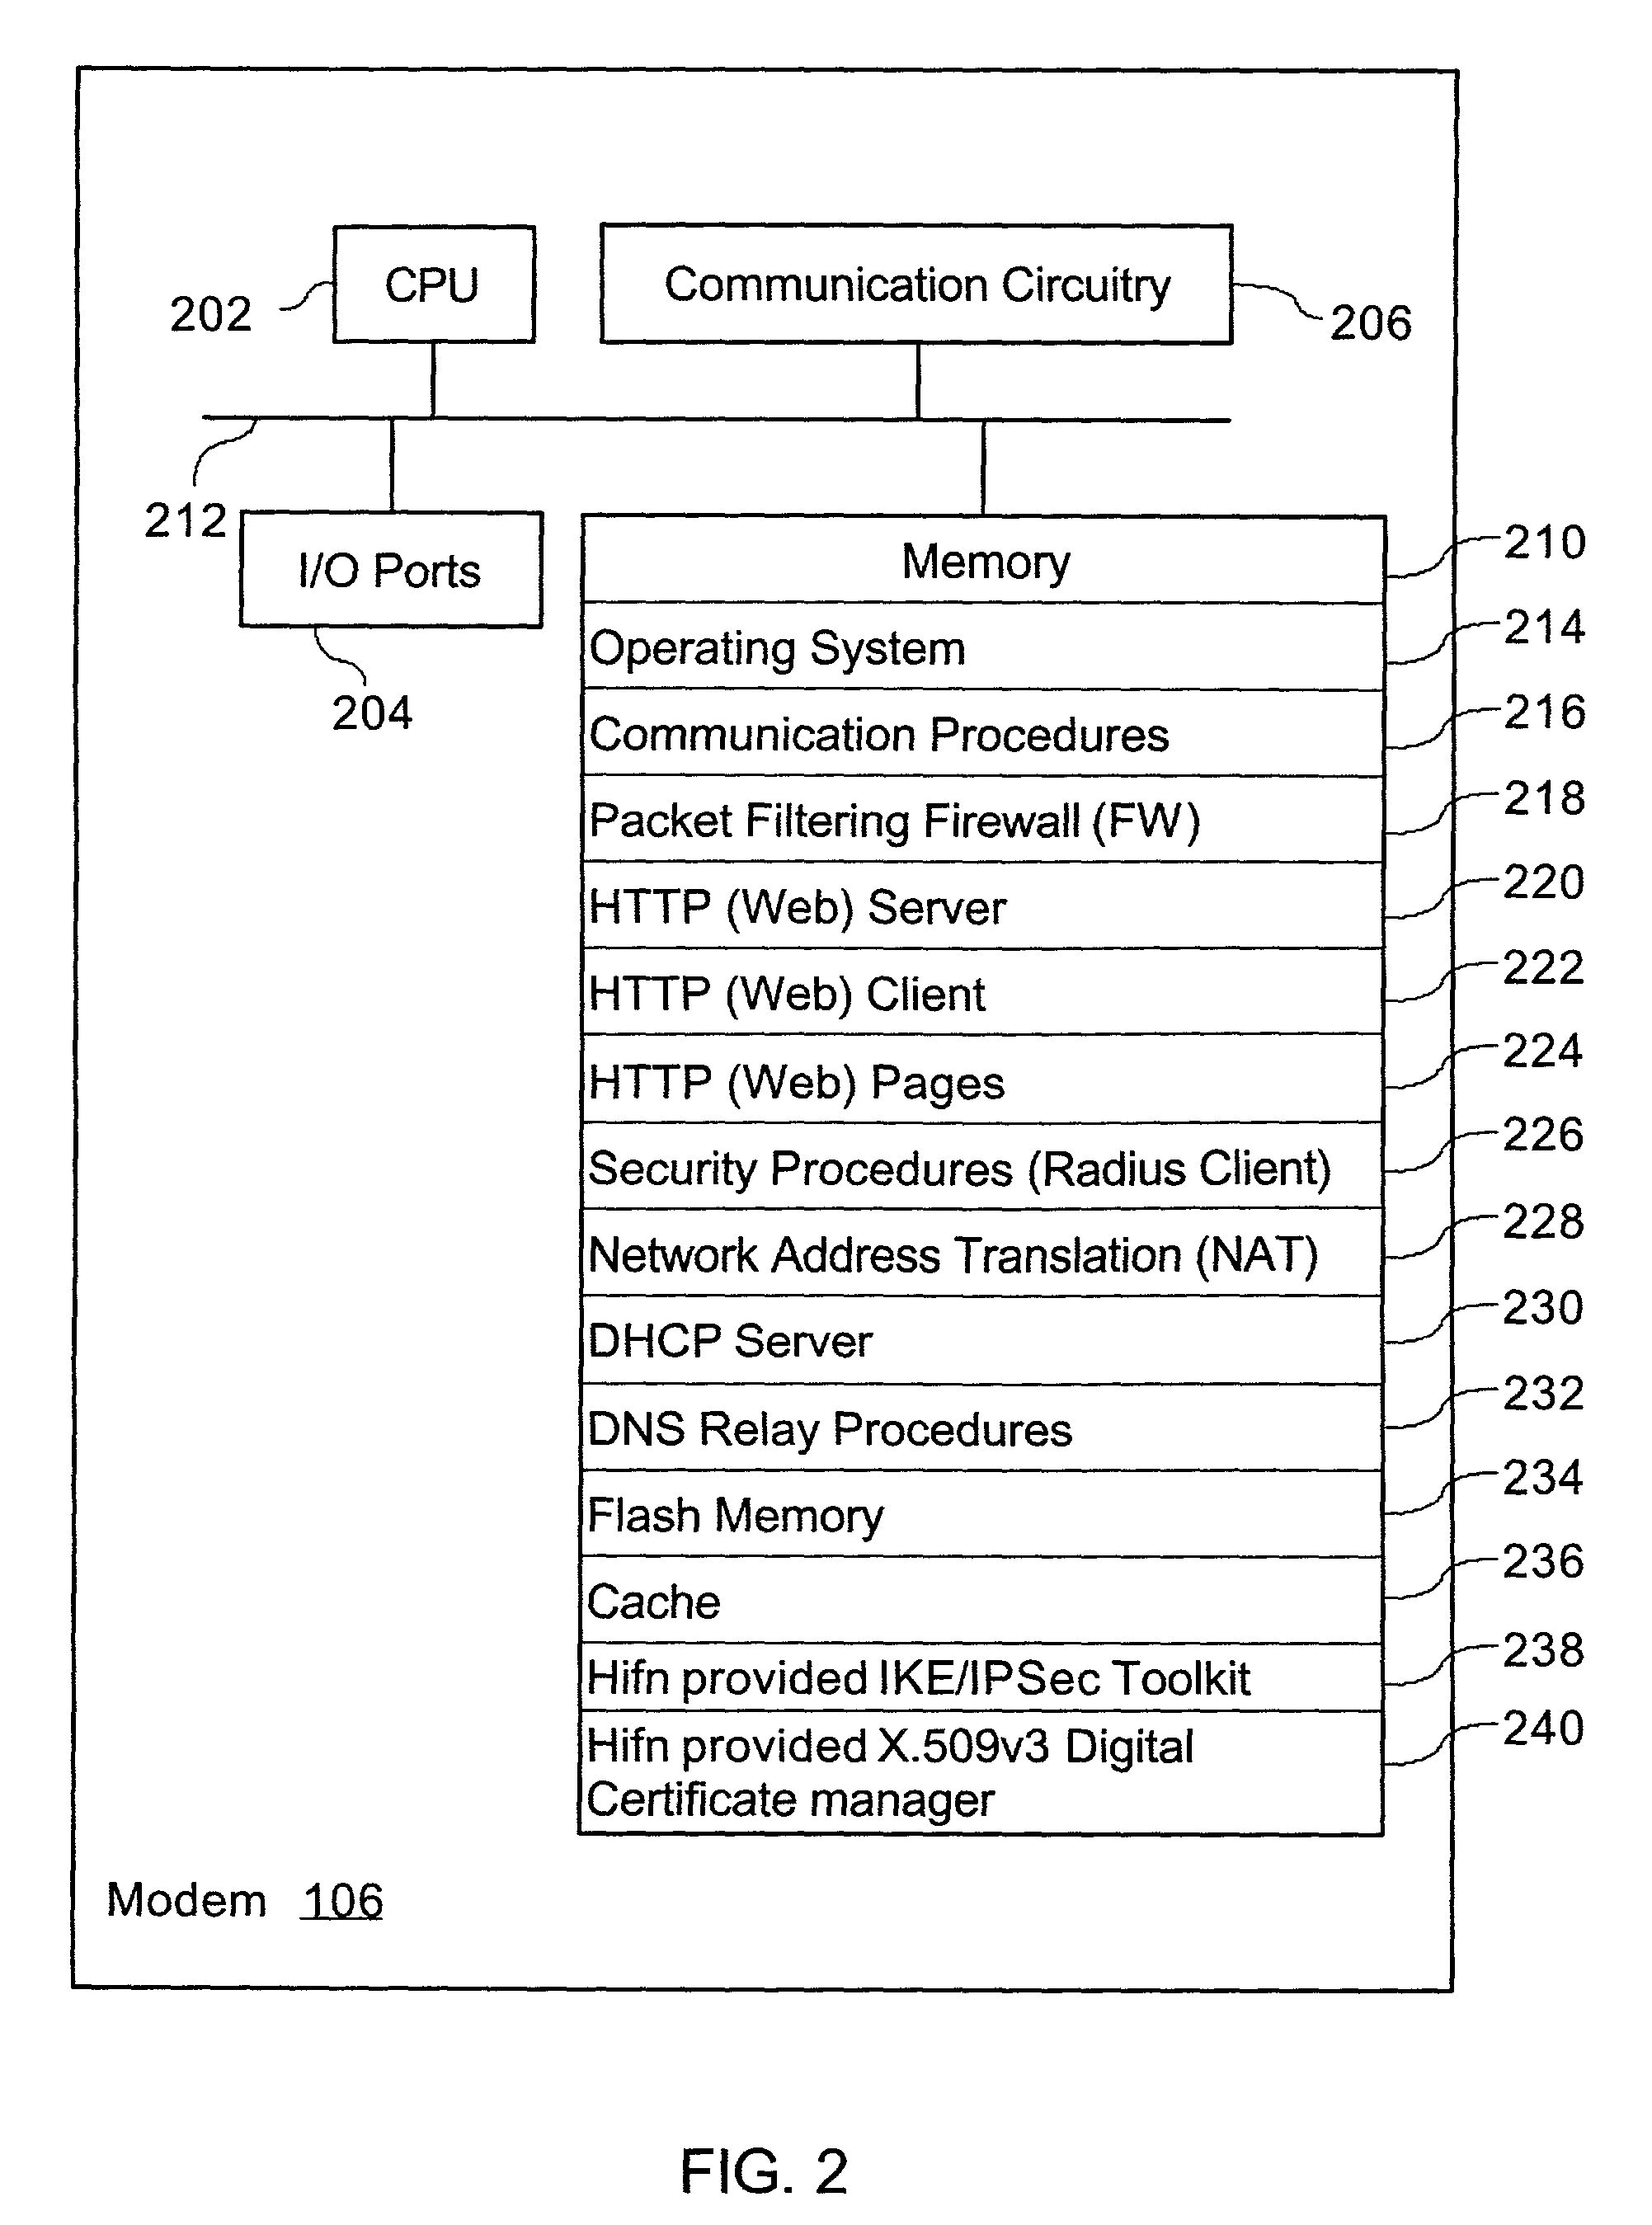 Automated configuration of a virtual private network